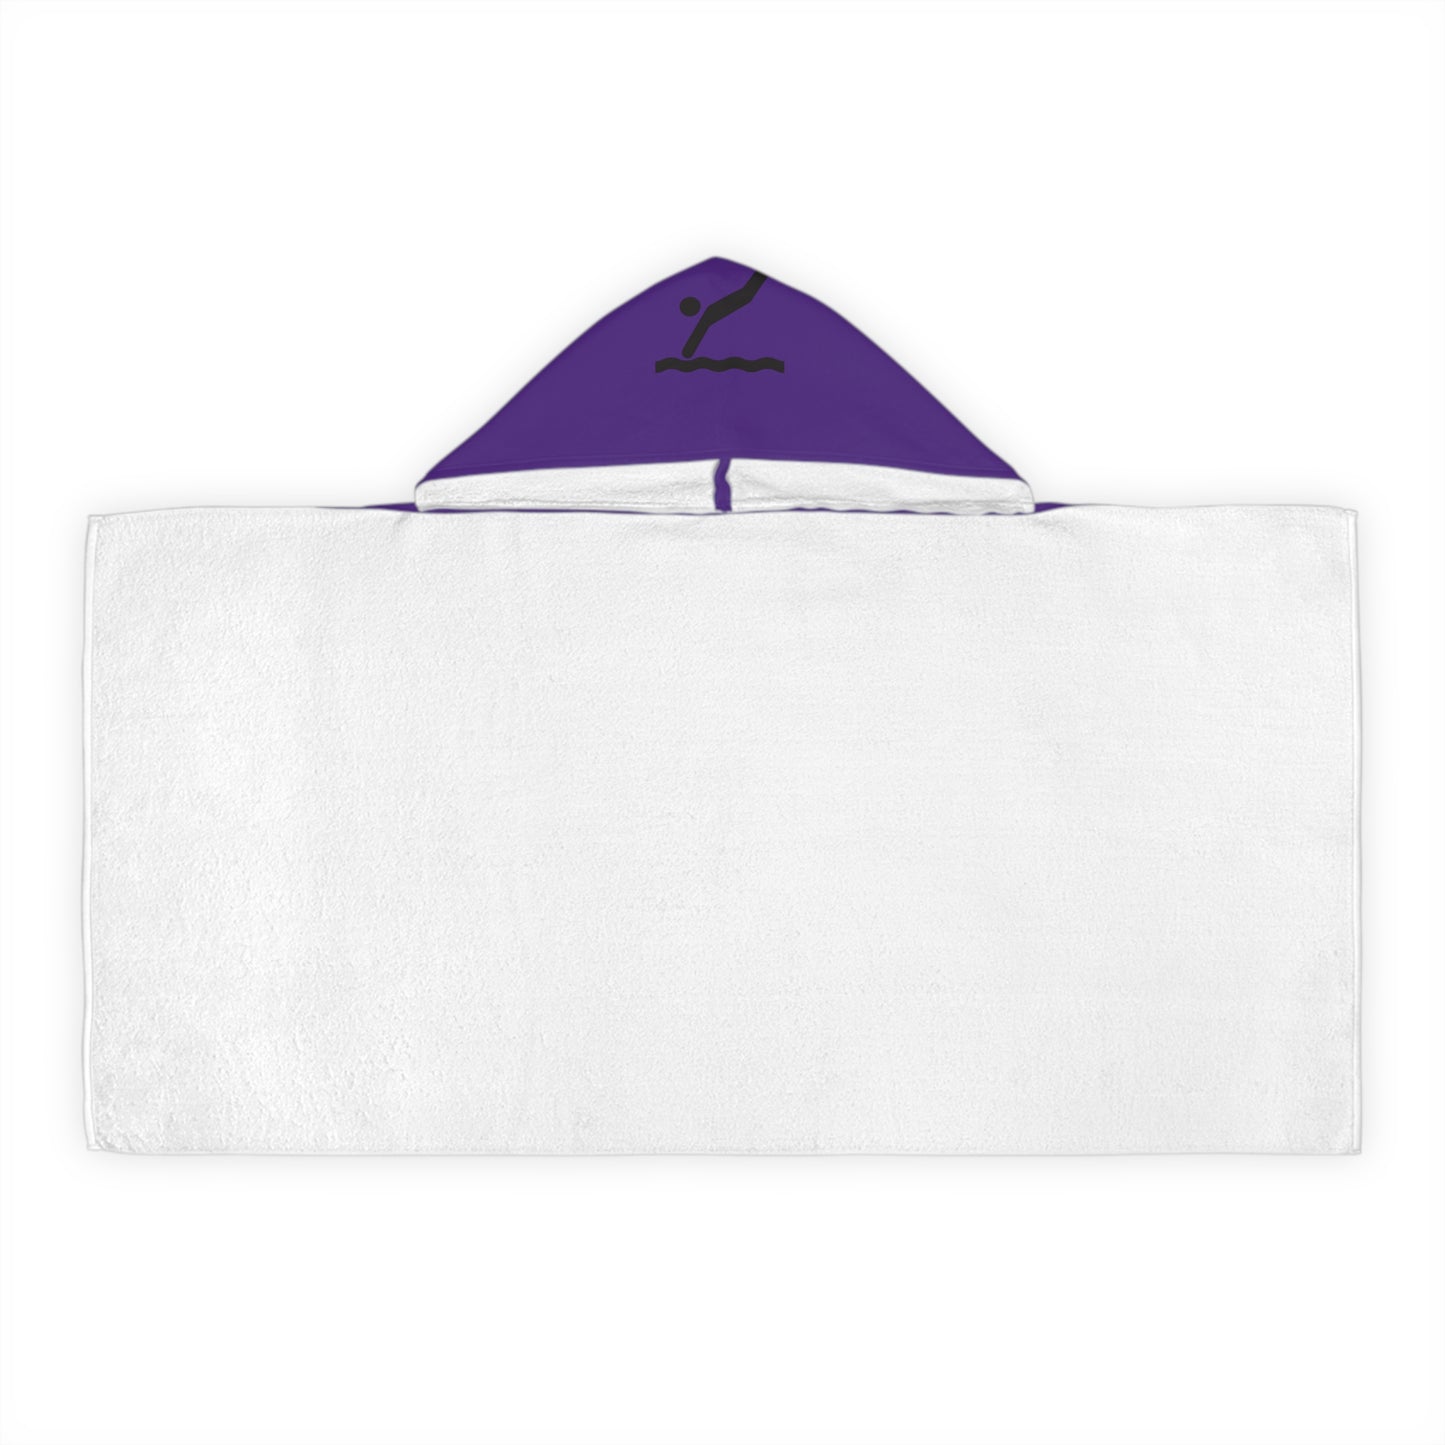 Youth Hooded Towel: Dragons Purple